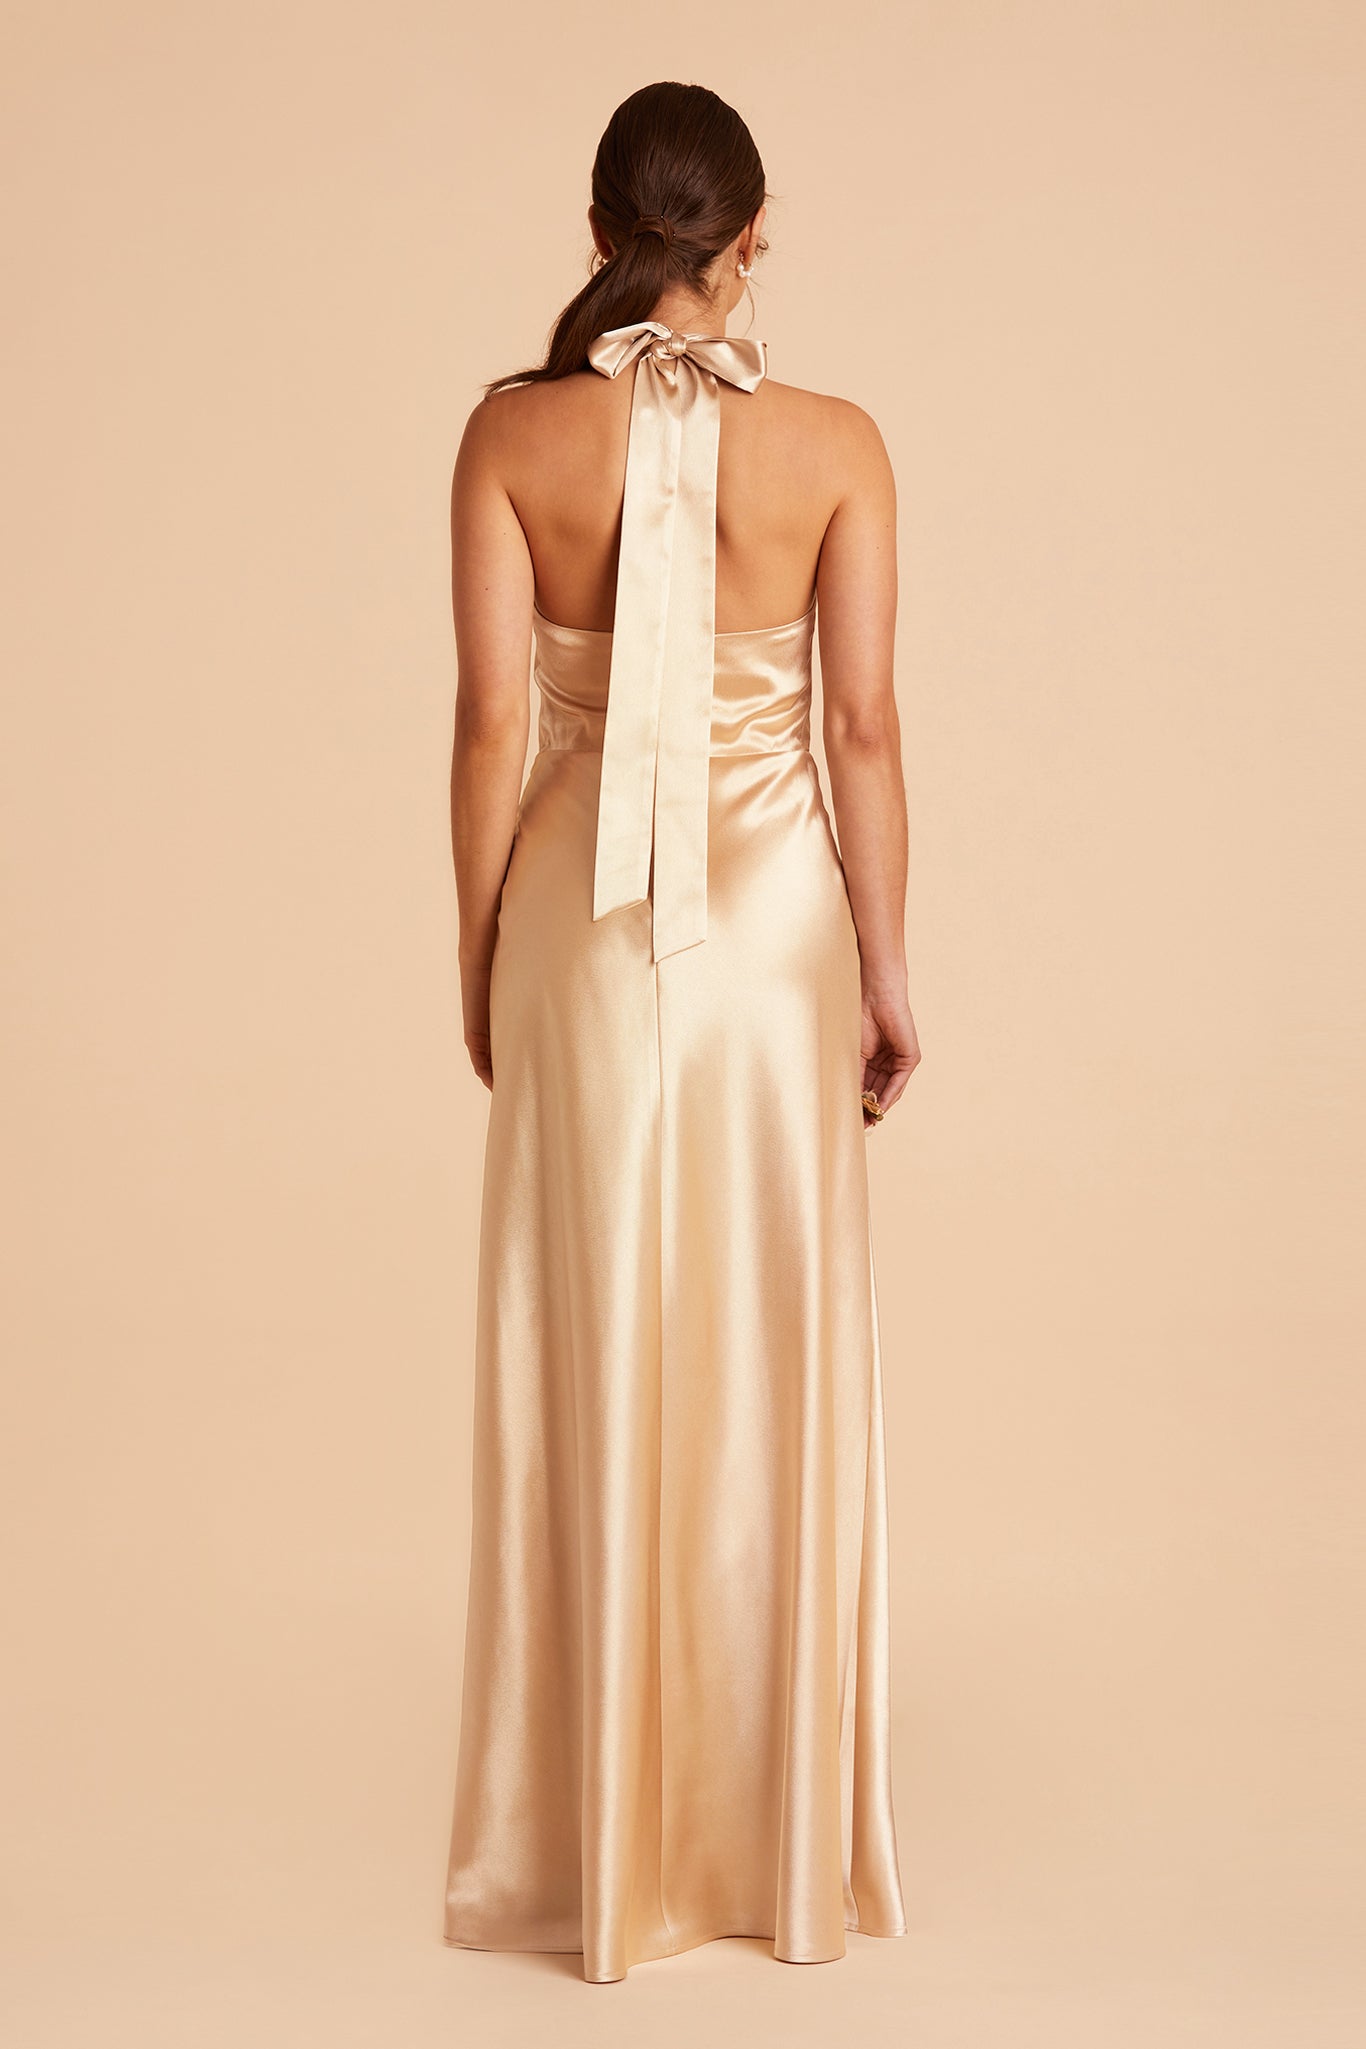 Monica Satin Dress in gold satin by Birdy Grey, front view